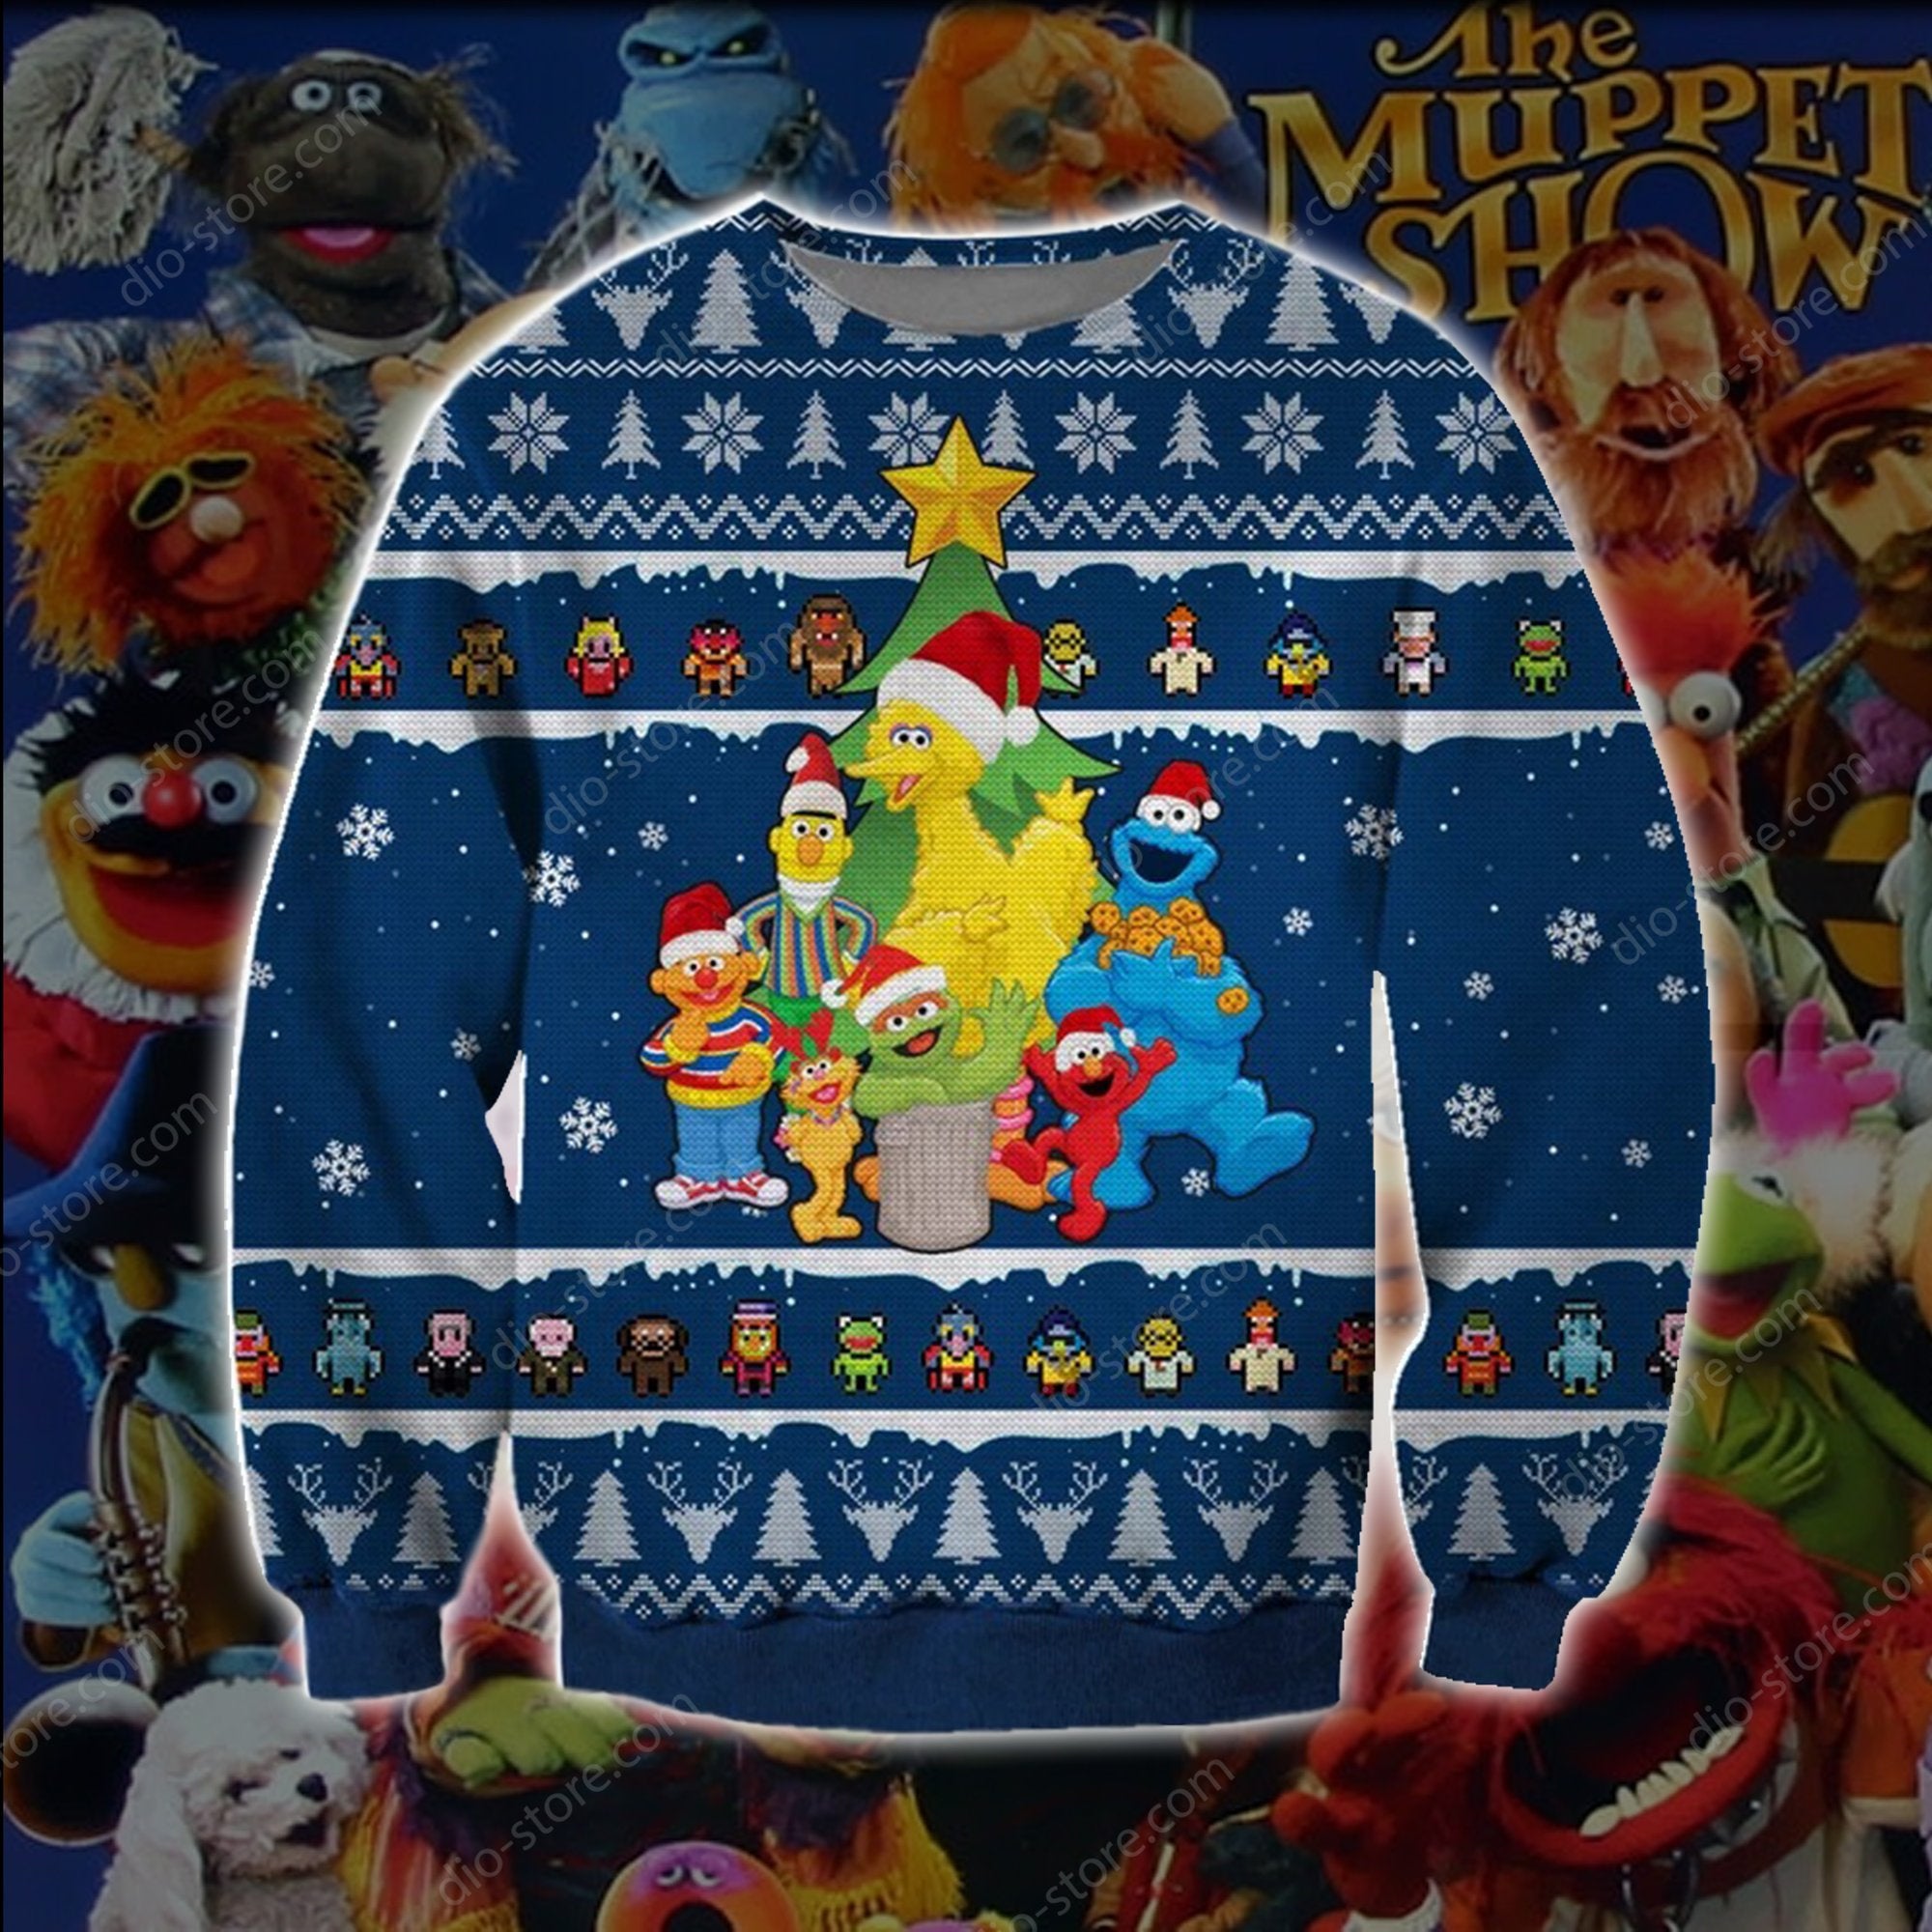 [ COOL ] The Muppet Show christmas tree knitting pattern ugly sweater – Saleoff 180122